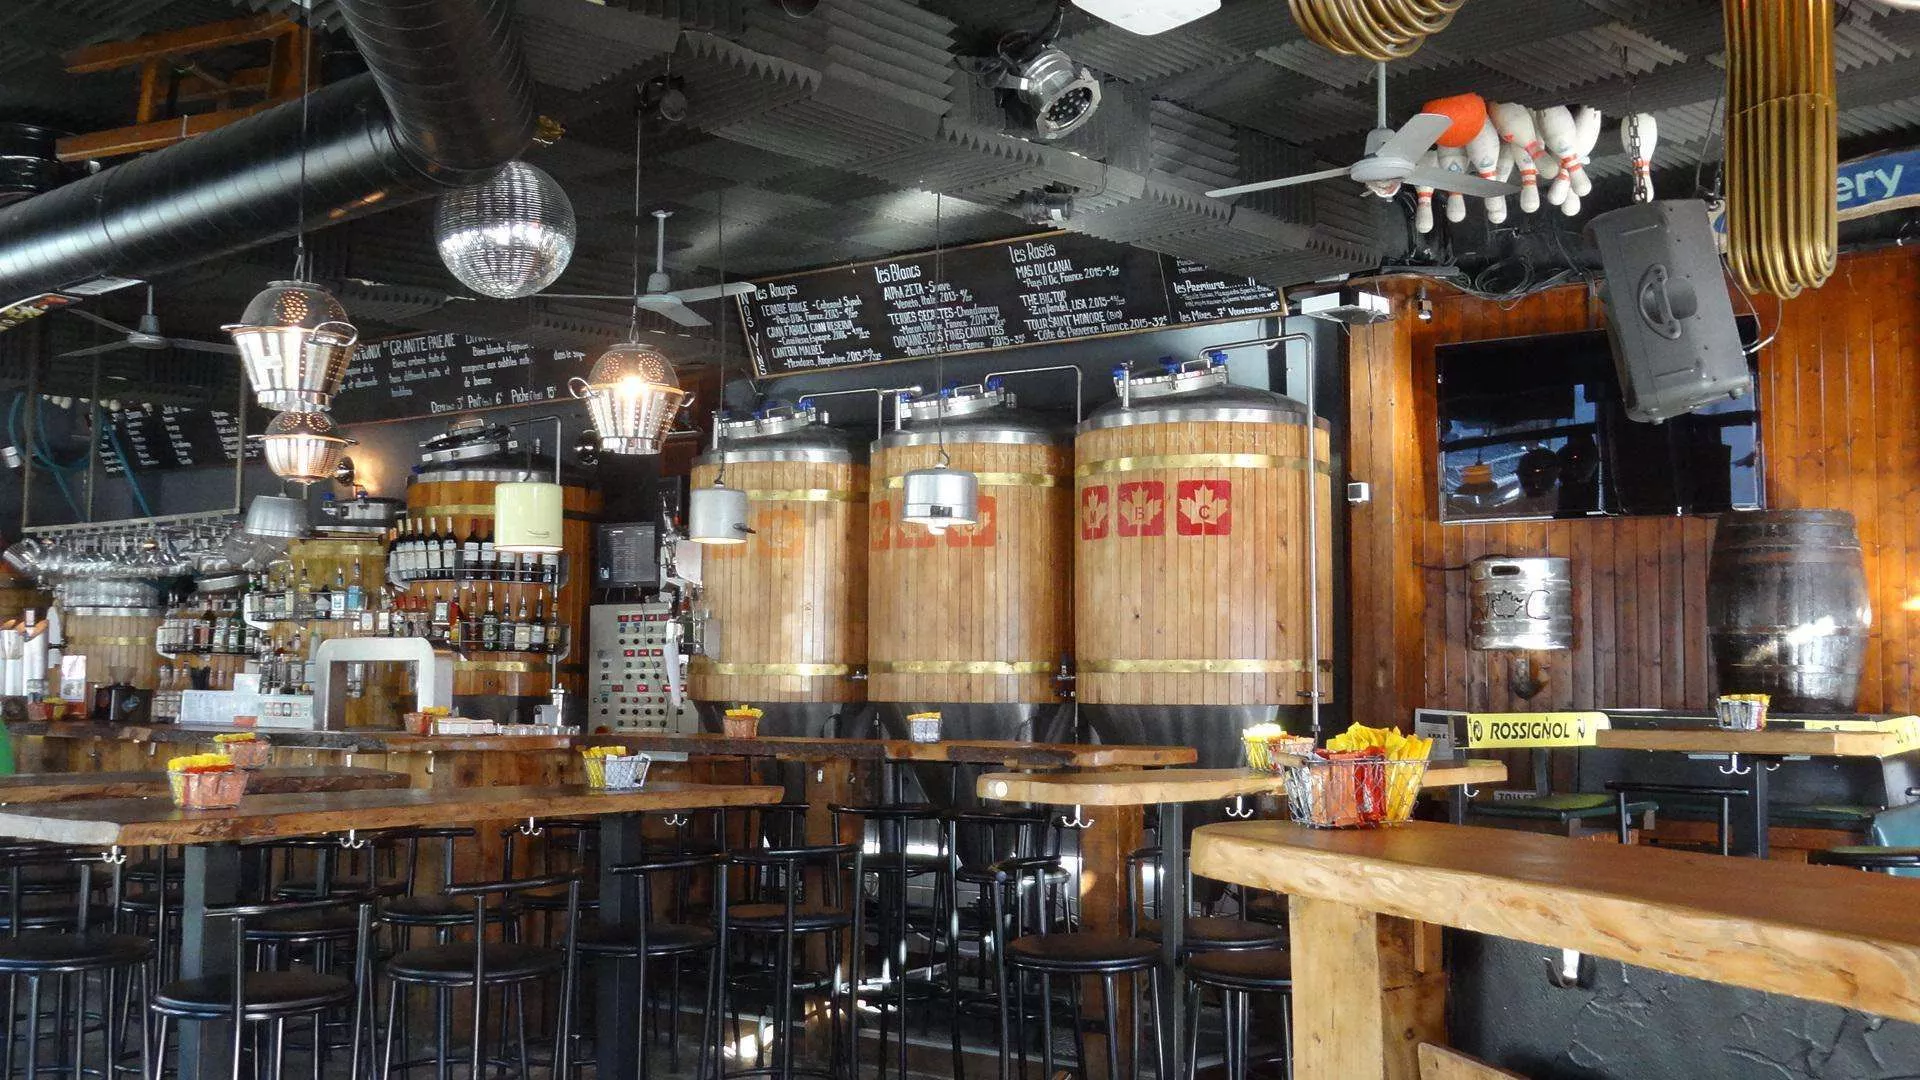 MBC Chamonix Microbrewery in France, Europe | Pubs & Breweries - Rated 3.6